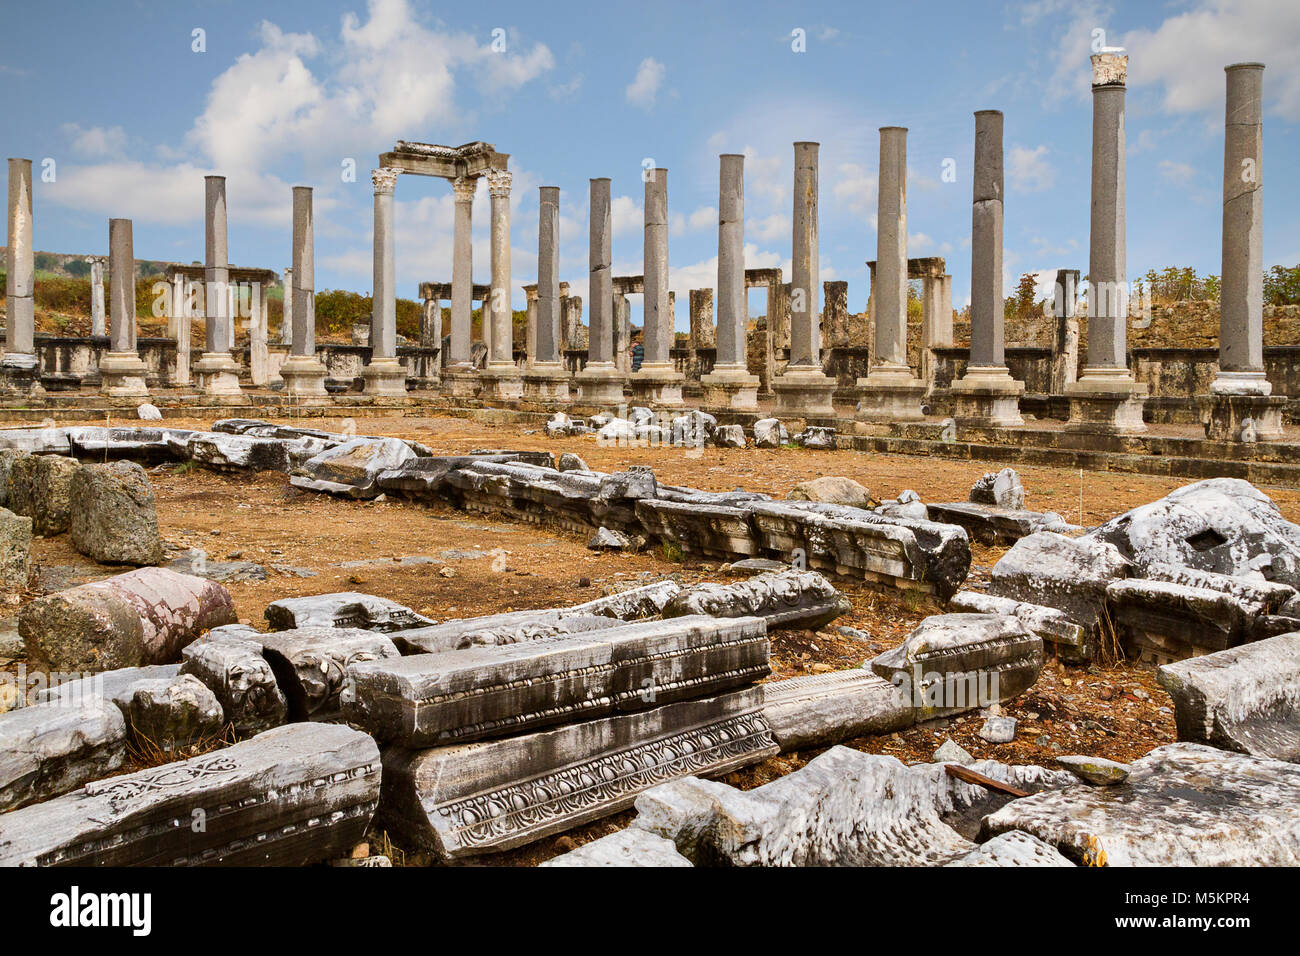 Columns of the roman agora in the ruins of the ancient city of Perge, Antalya, Turkey. Stock Photo